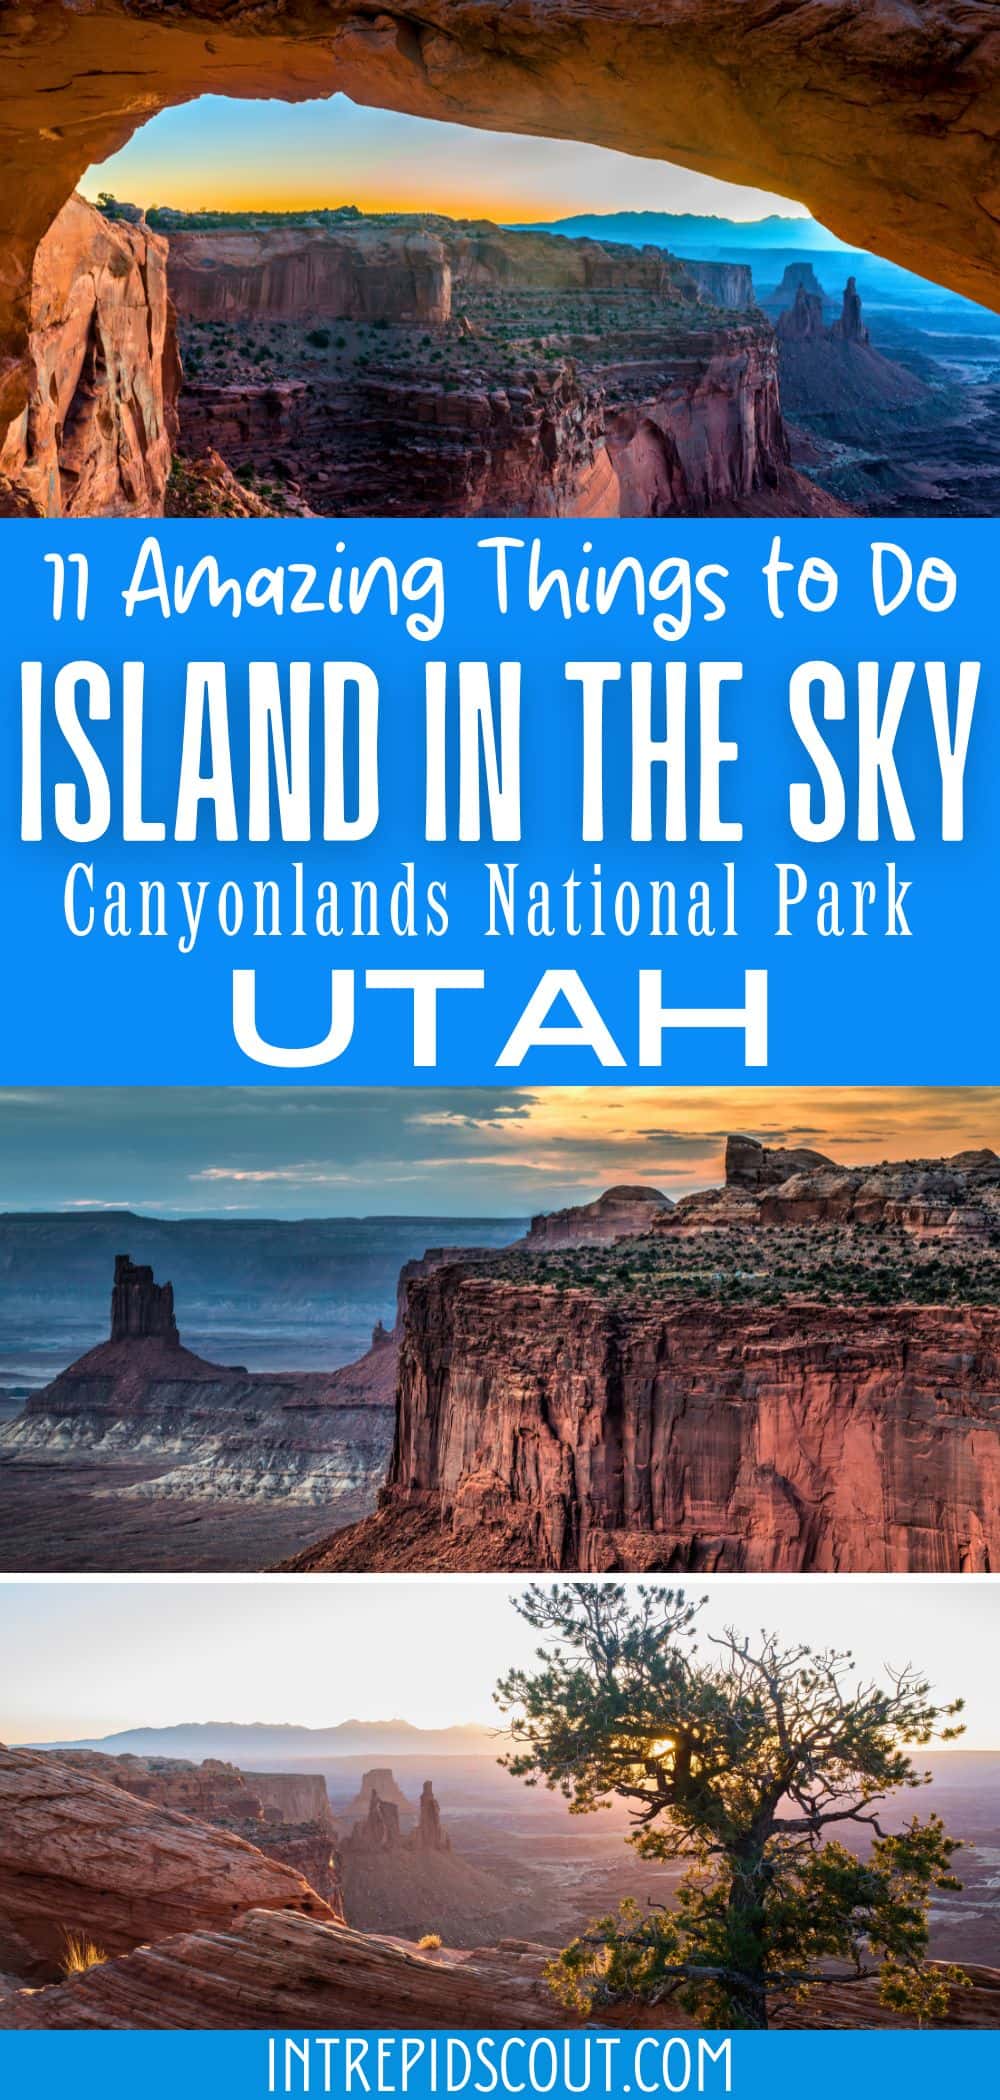 Things to Do in Island in the Sky